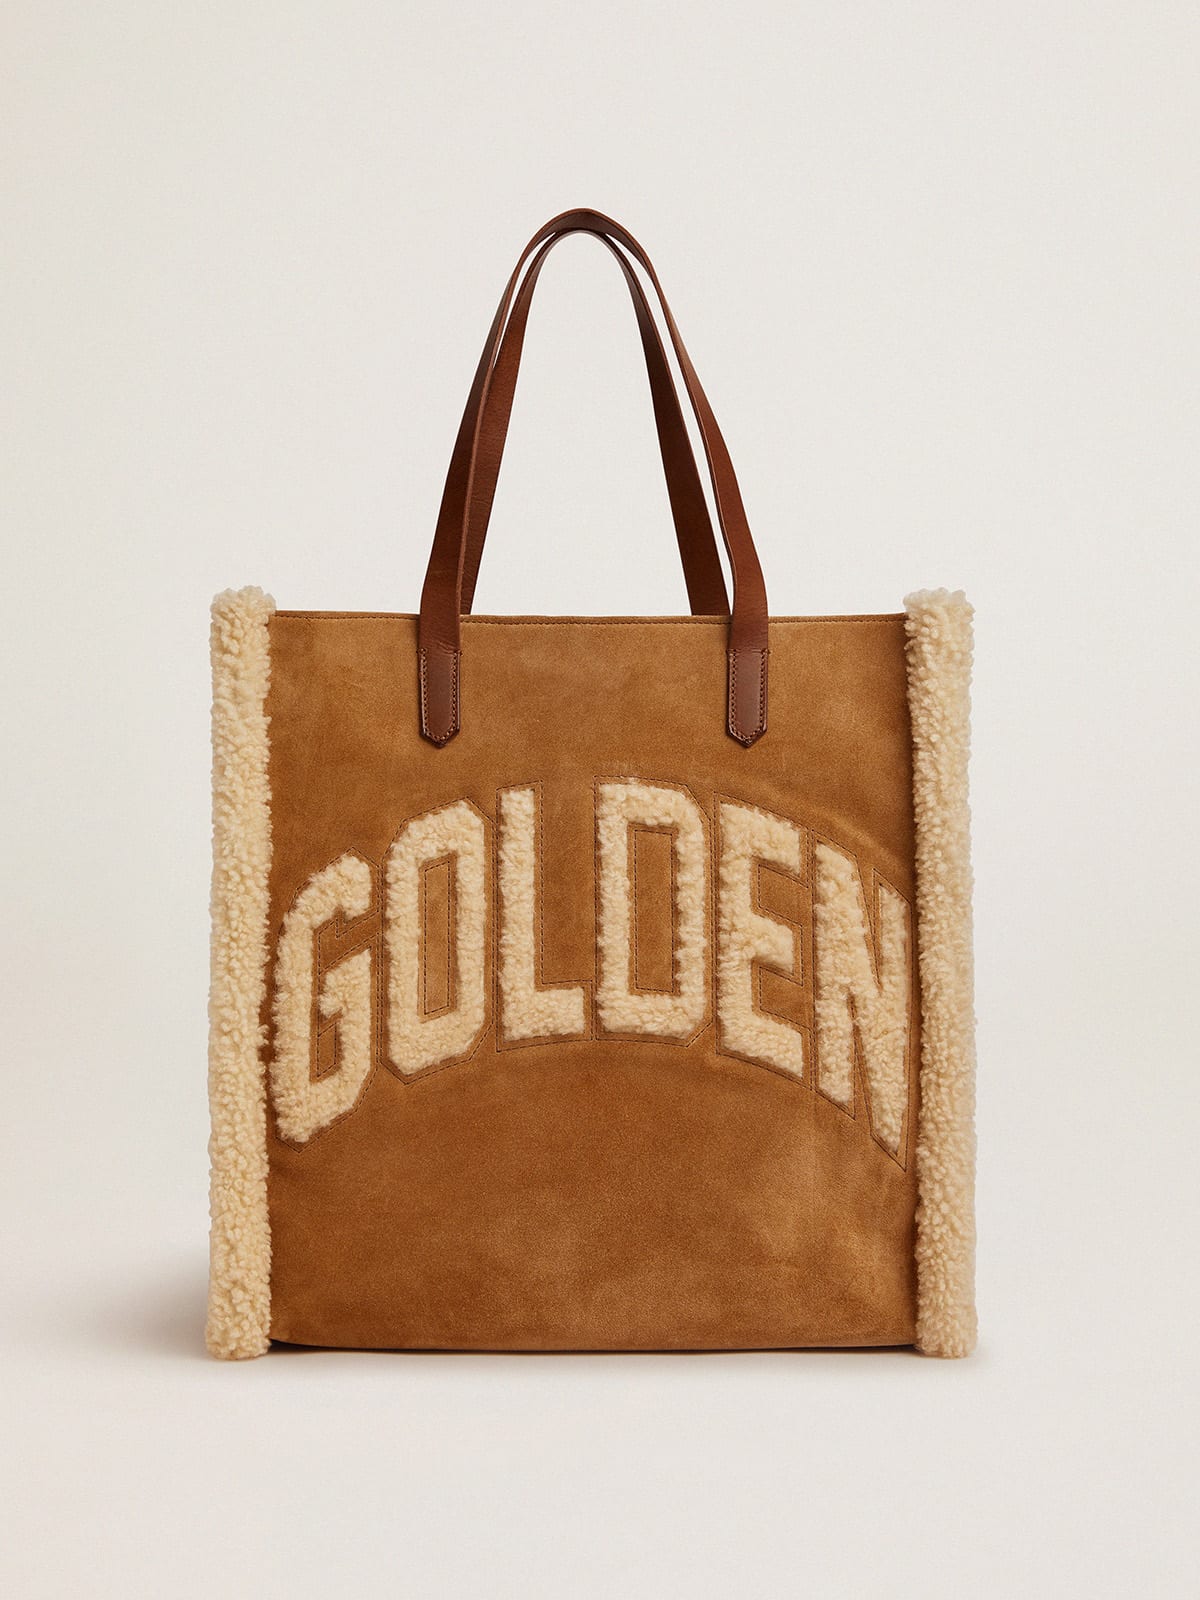 North-South California Bag in suede leather with shearling